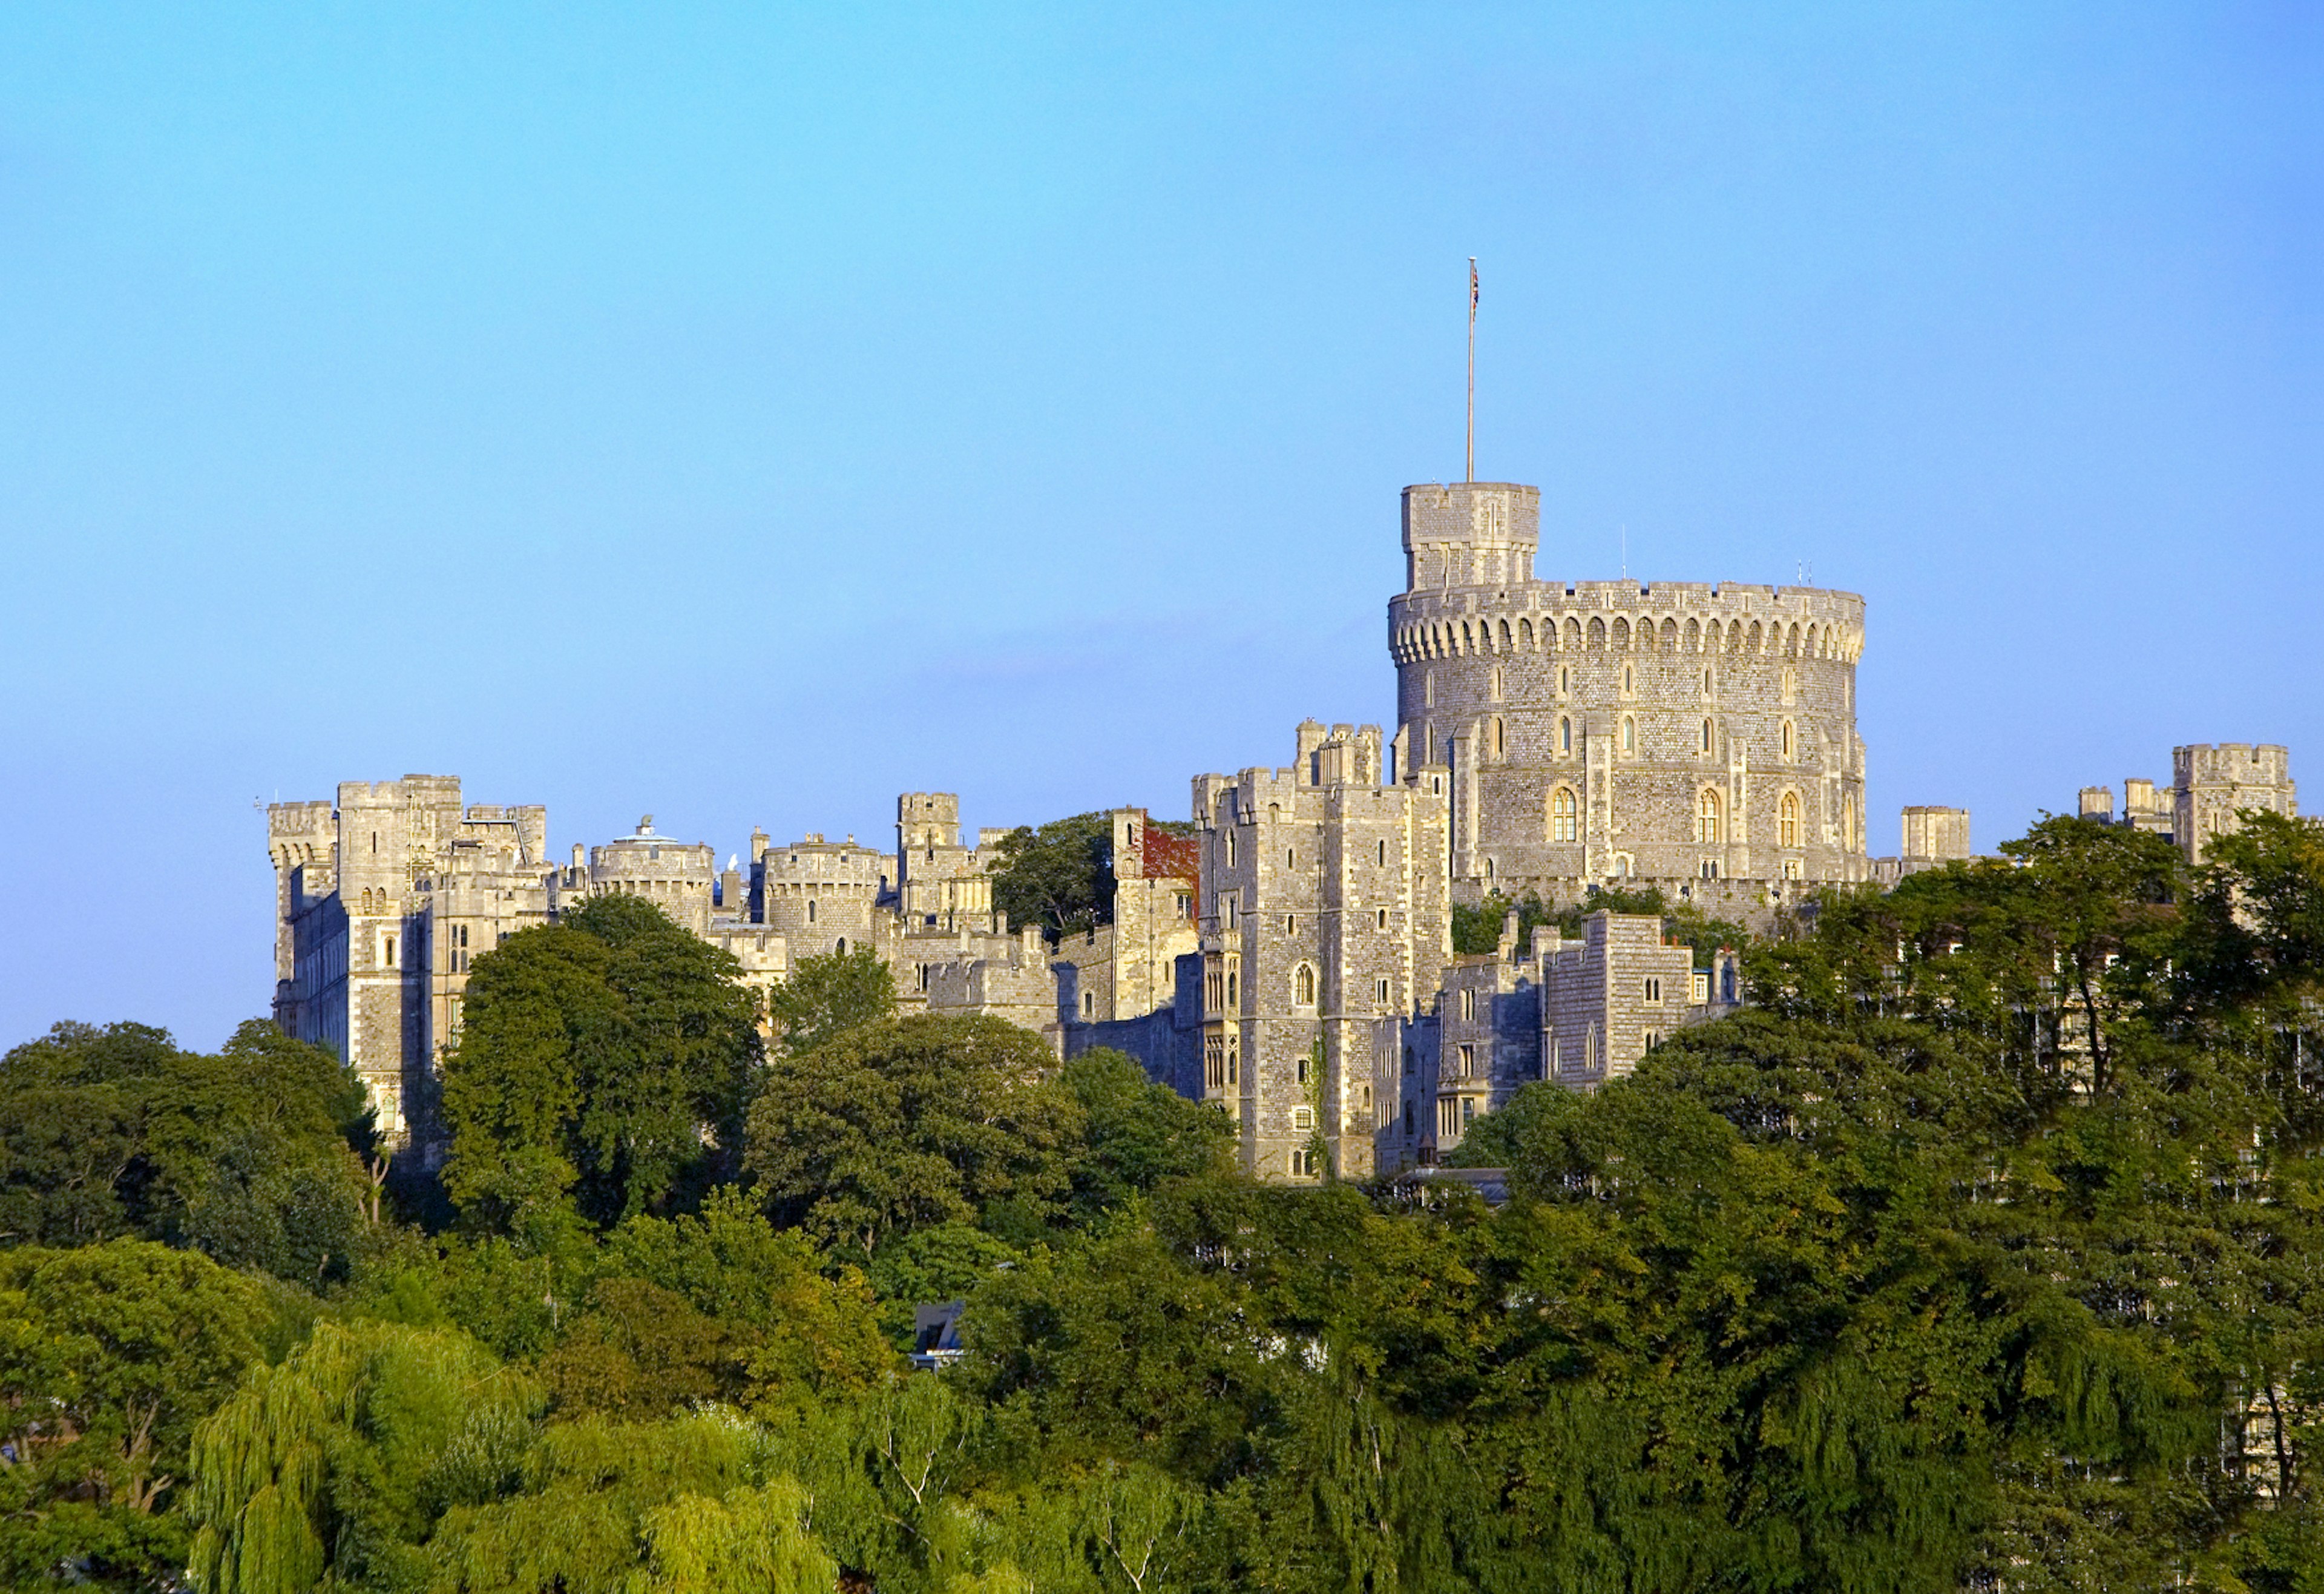 Windsor Castle's grand turrets tower above the surrounding trees © Scott E Barbour / Getty Images